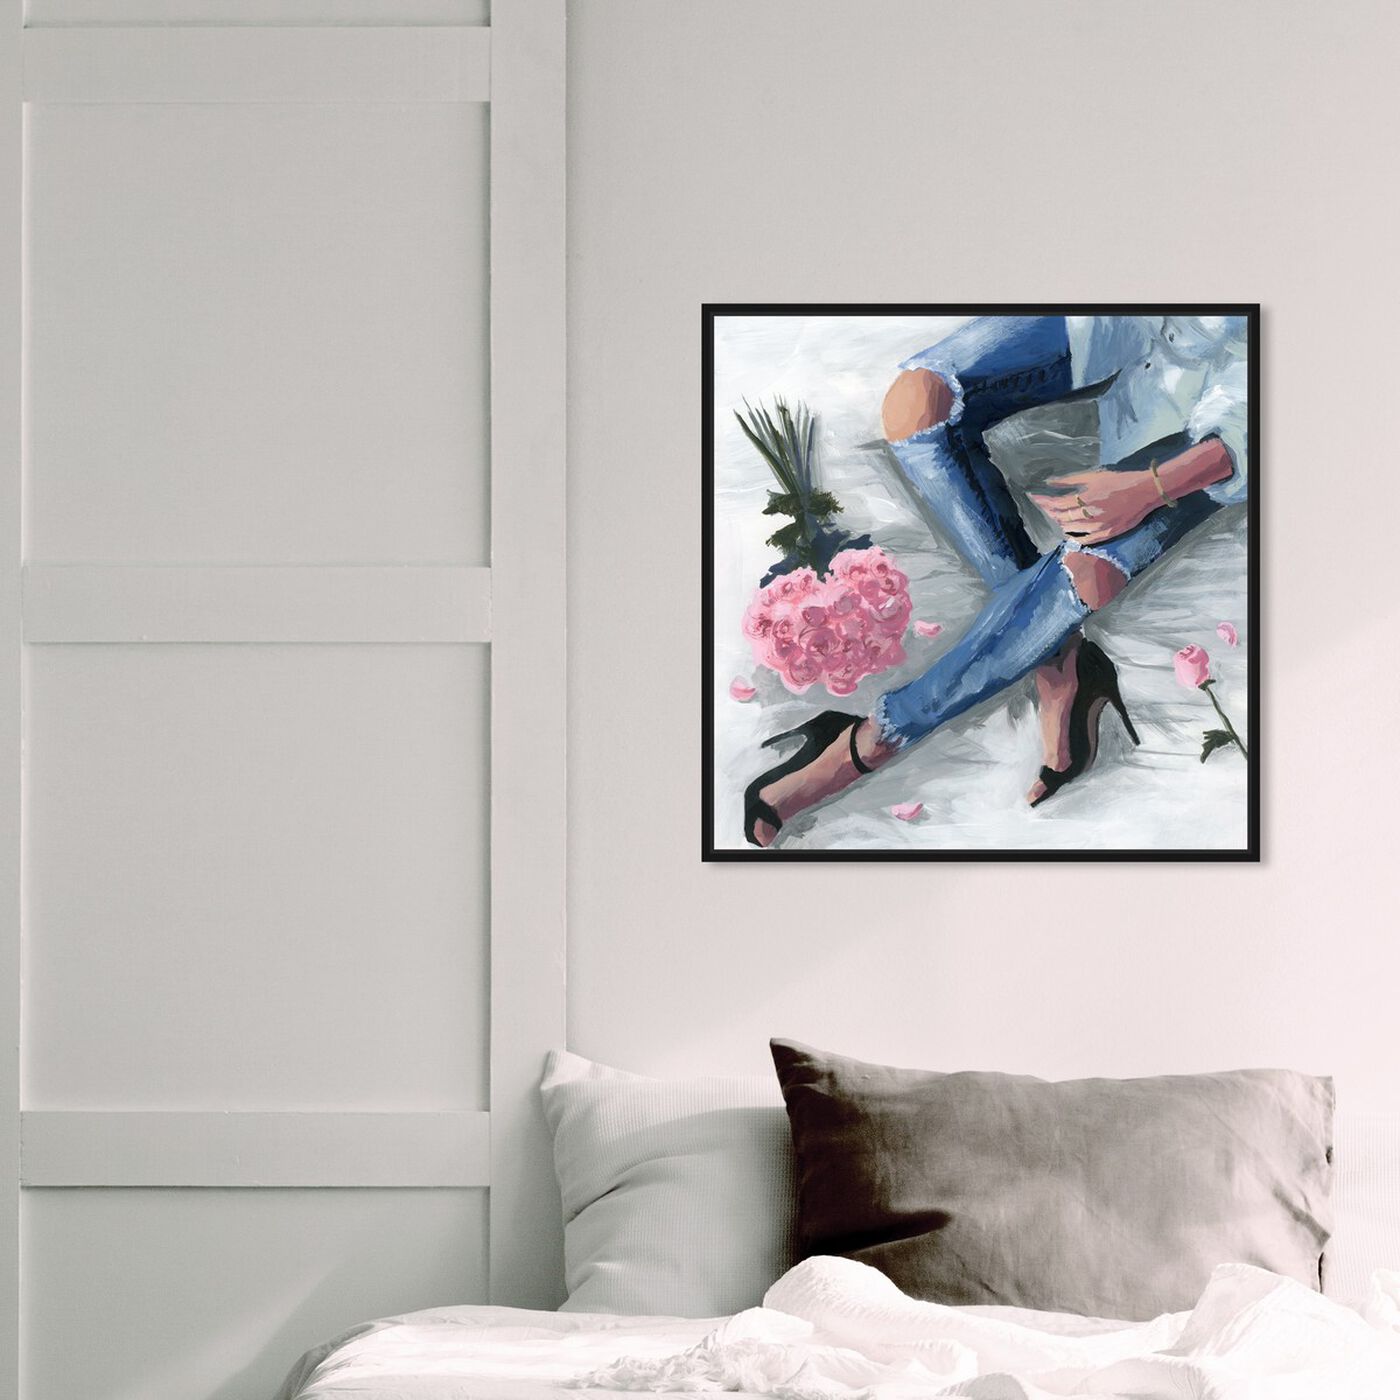 Hanging view of Romantic Jeans featuring fashion and glam and outfits art.